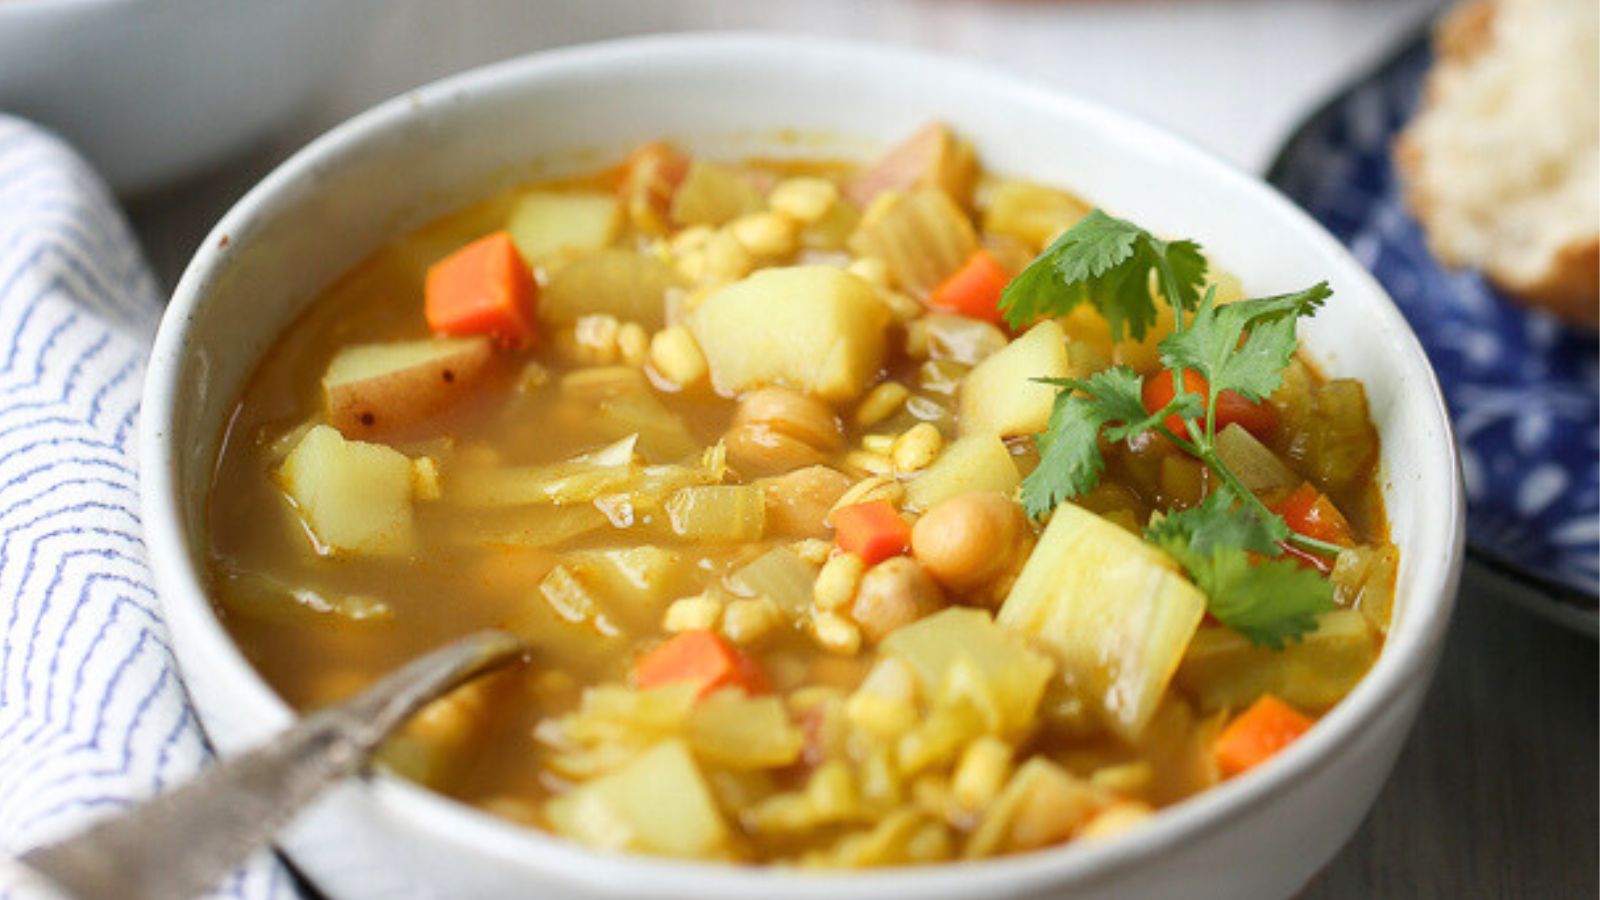 A bowl of vegetable barley soup flavored with curry powder.